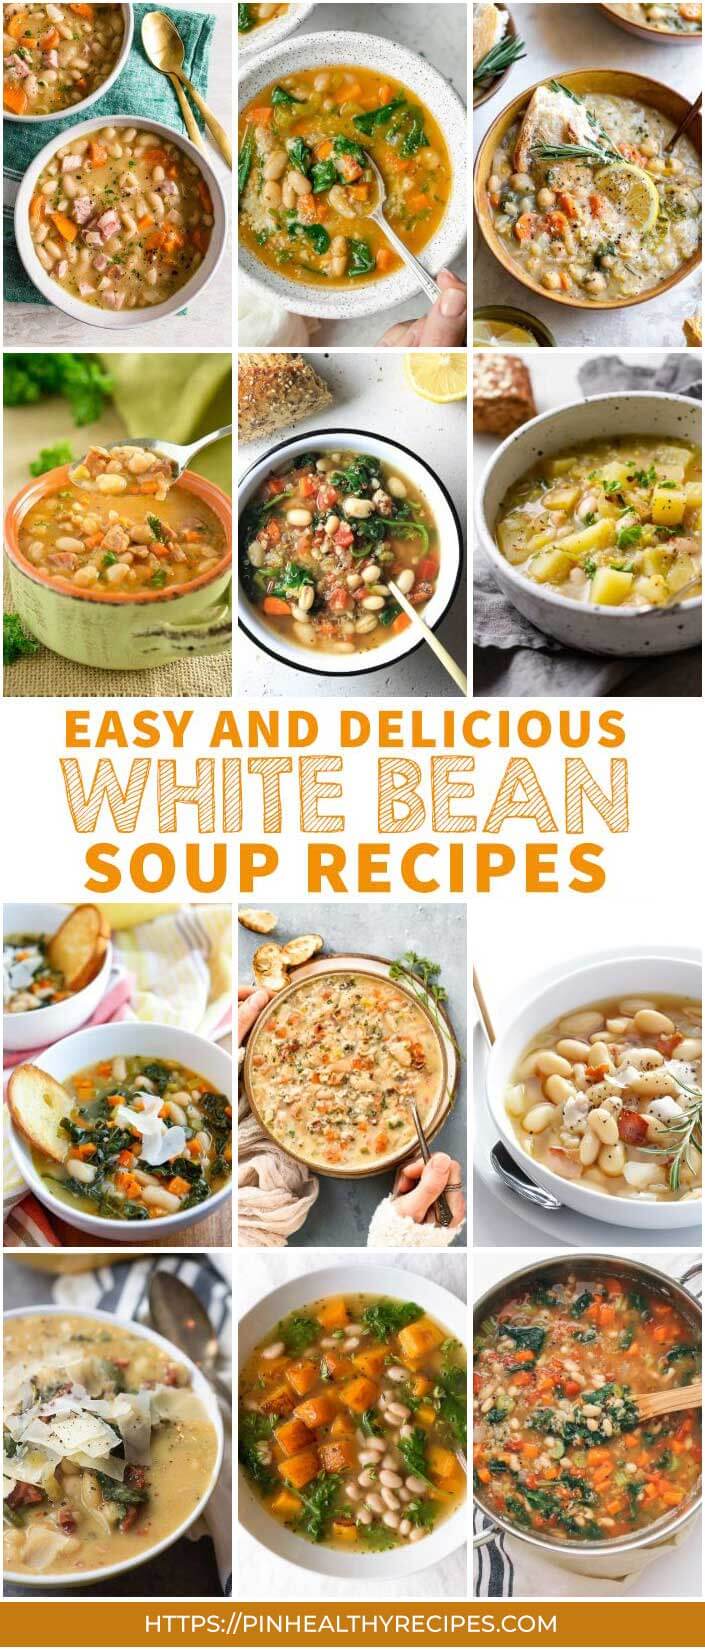 Easy And Delicious White Bean Soup Recipes